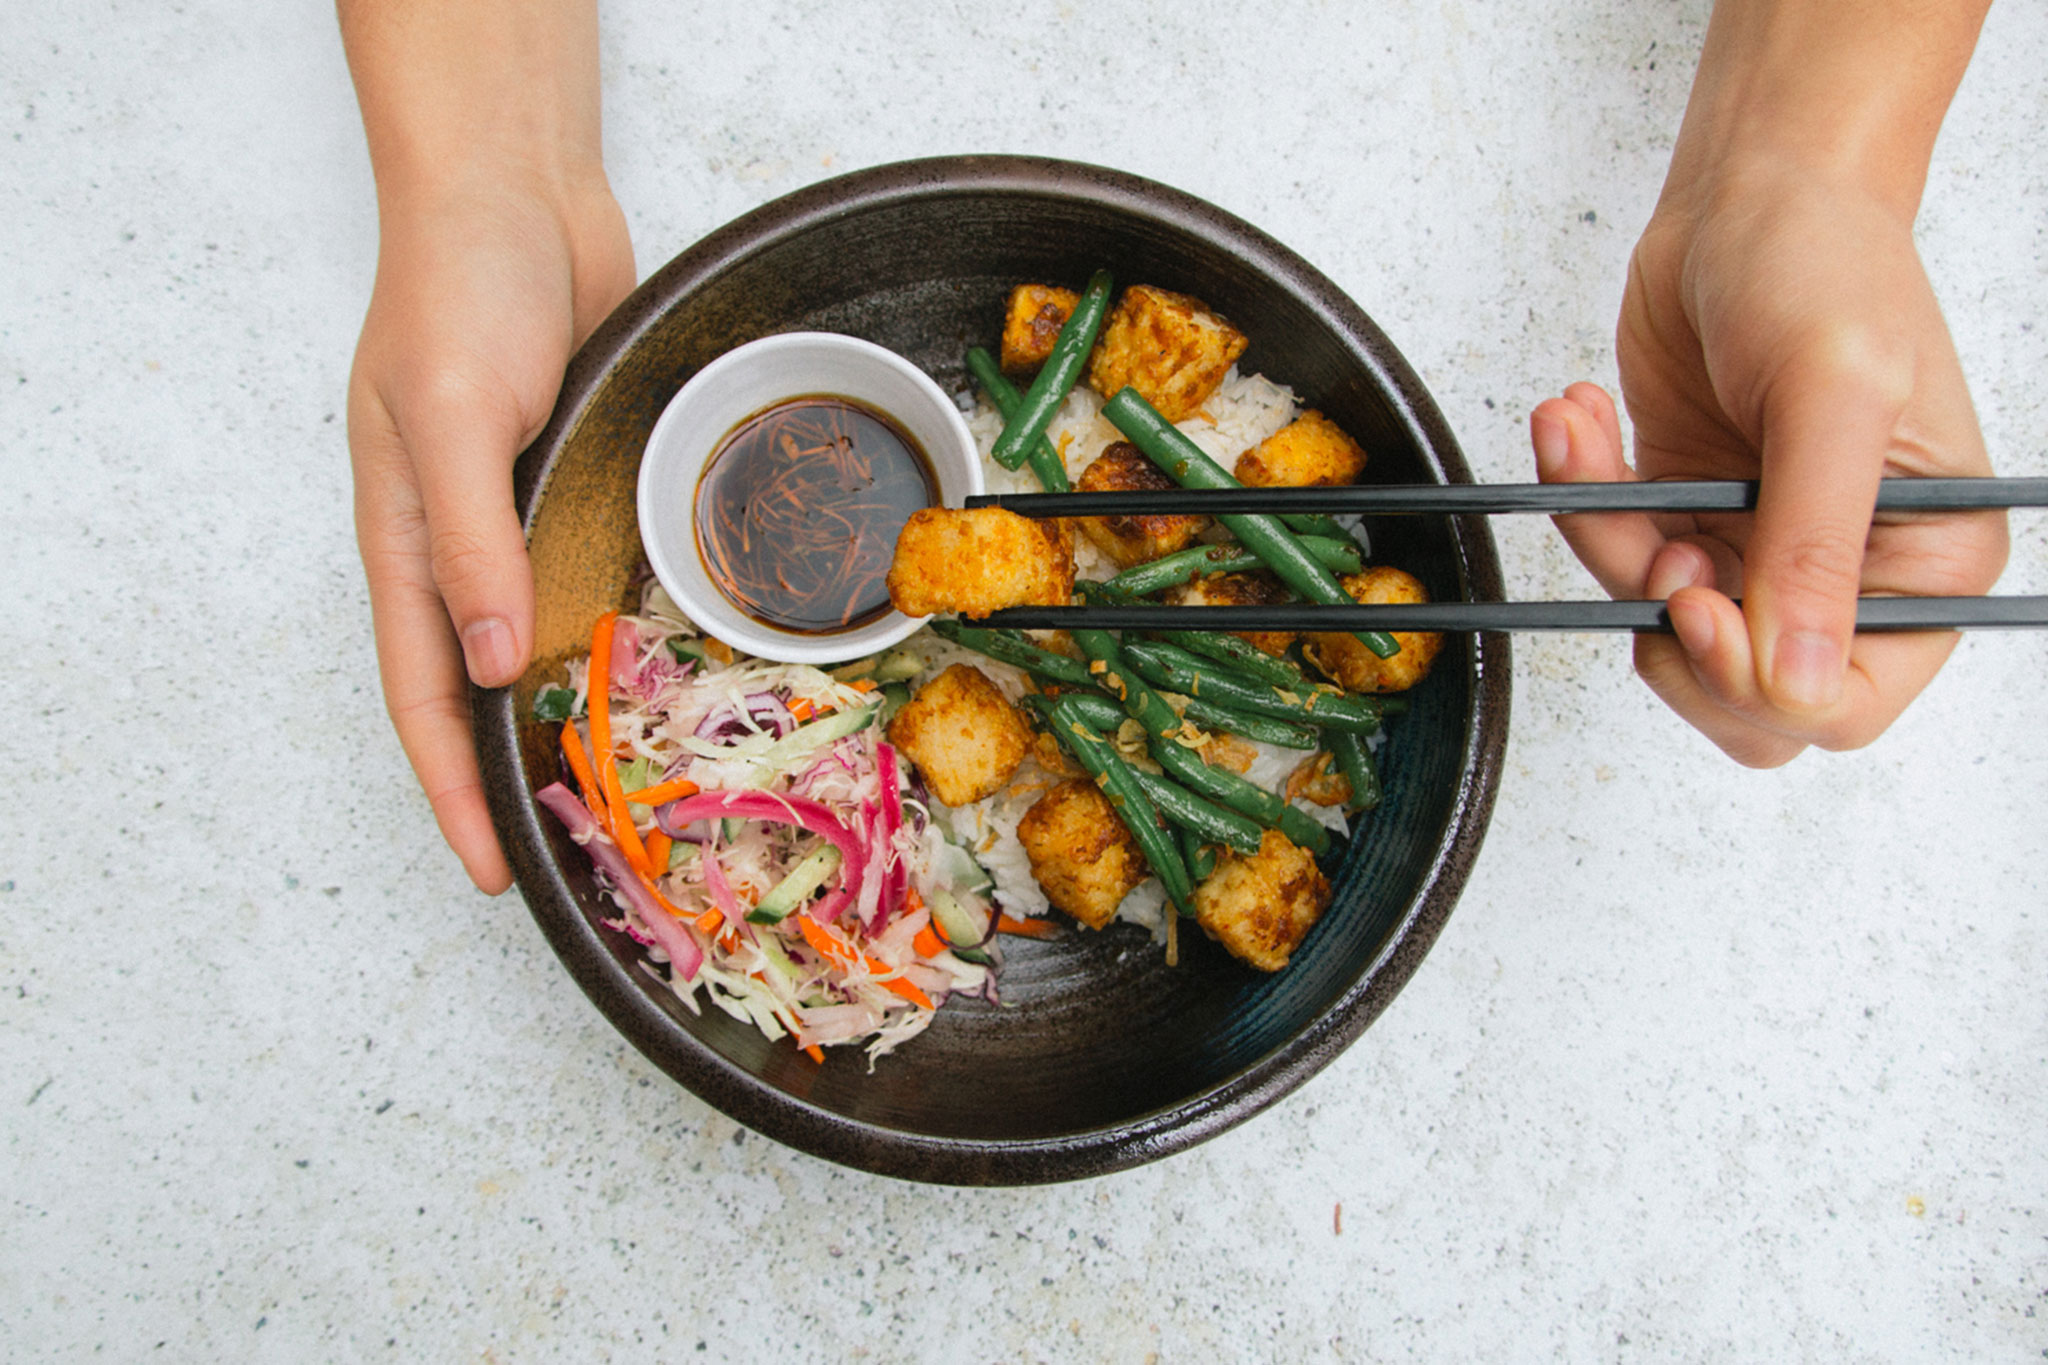 Hands holding chopsticks dig into an Asian bowl with sauce